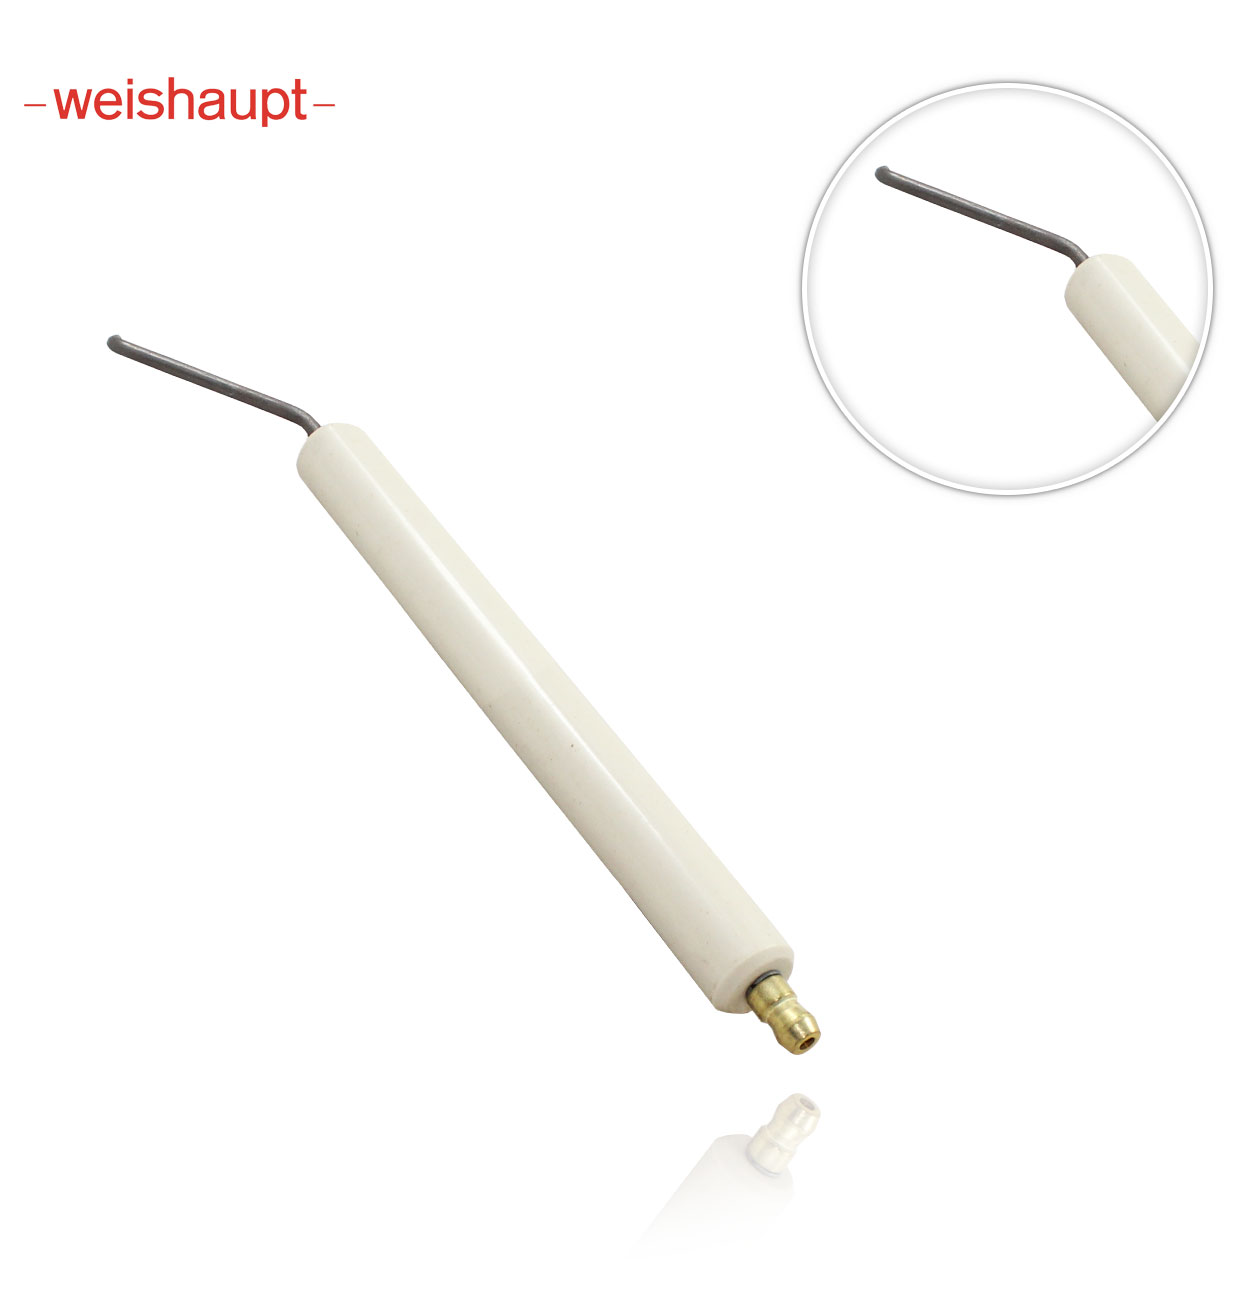 L 5 (Z) RIGHT ELECTRODE WEISHAUPT 11156410027